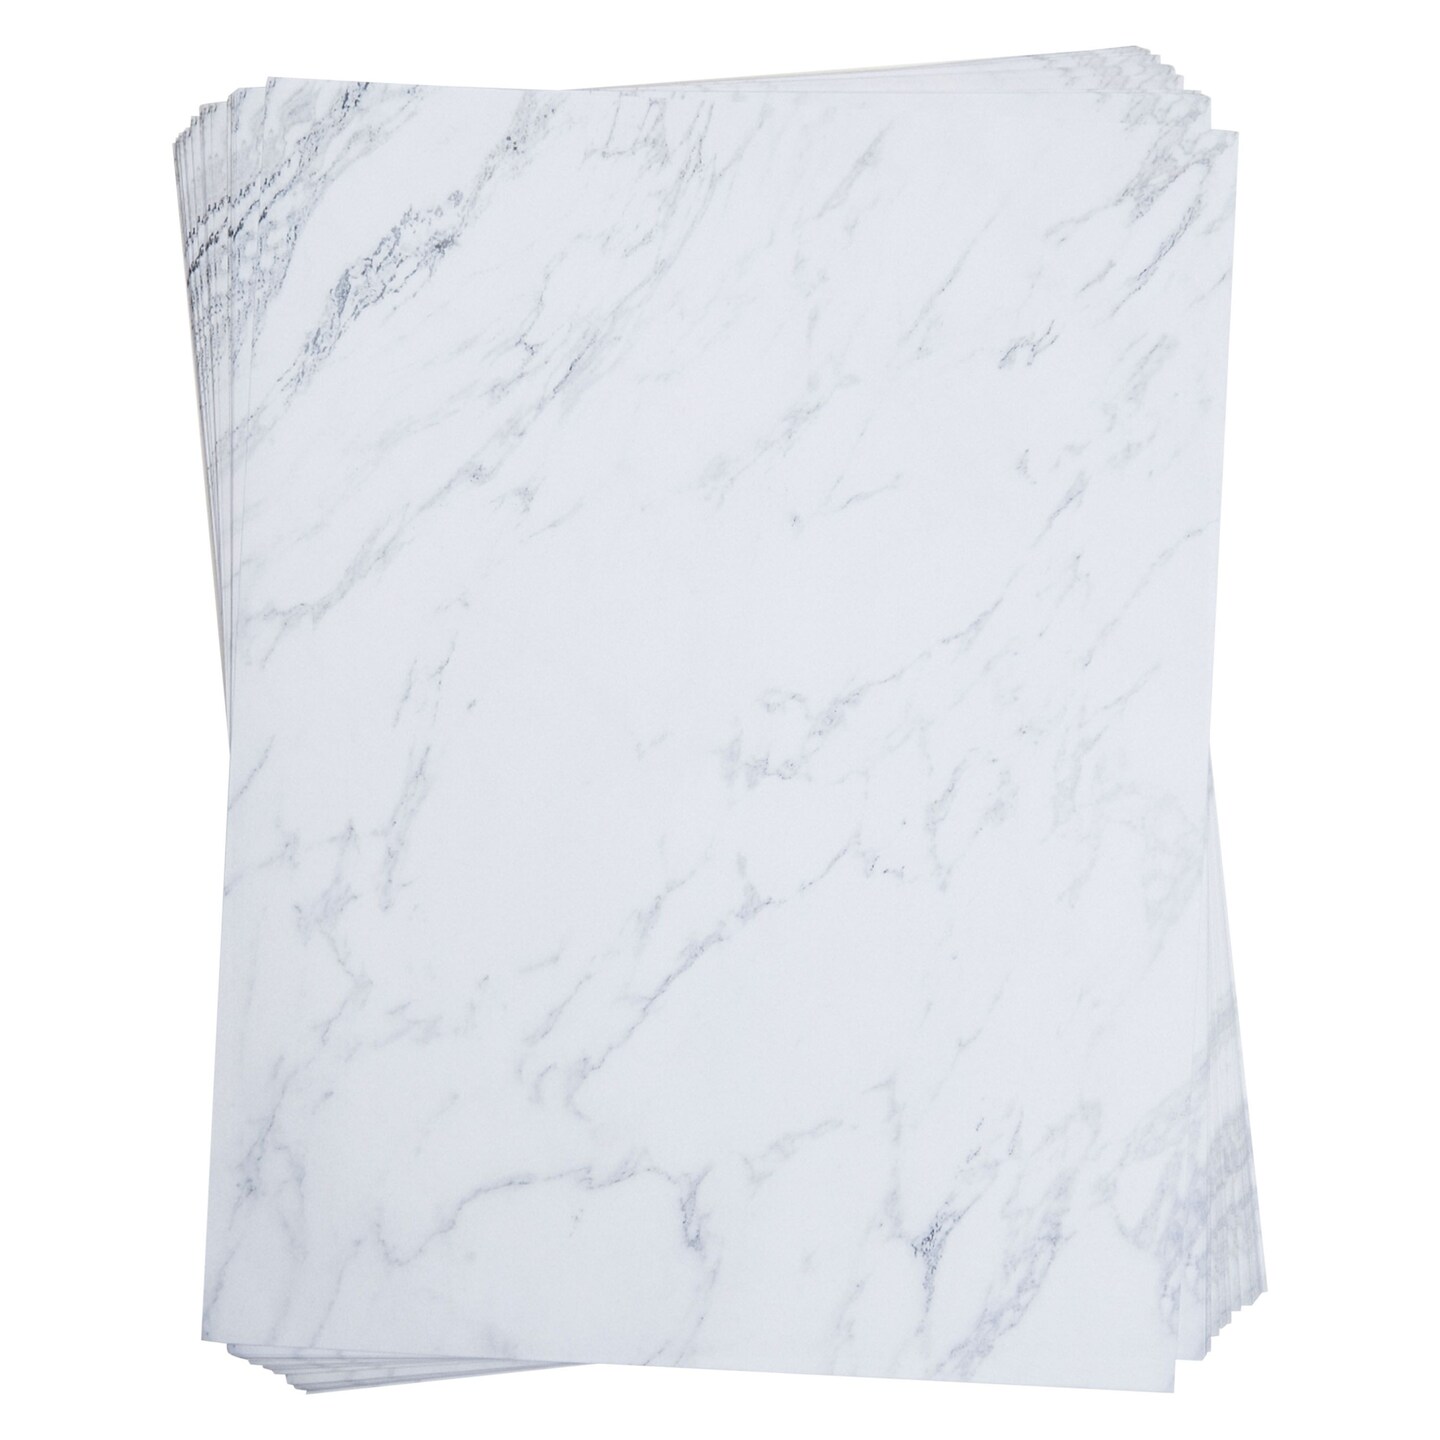 Marble Stationery Paper, Printer Friendly Decorative Letterhead (8.5 x 11  In, 48 Sheets)